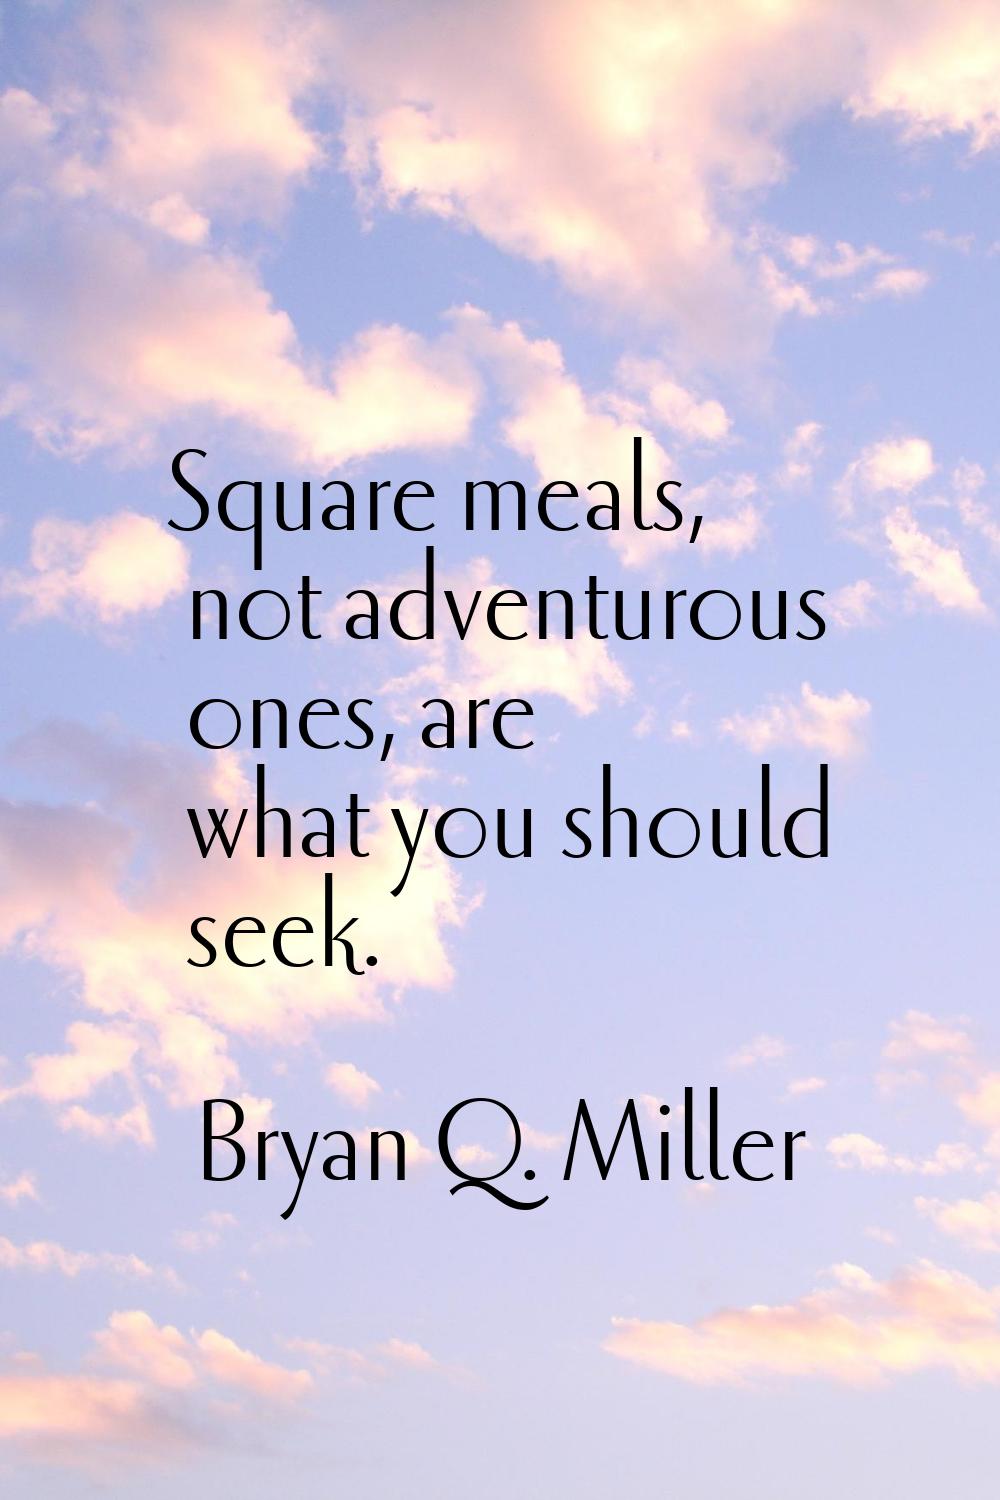 Square meals, not adventurous ones, are what you should seek.